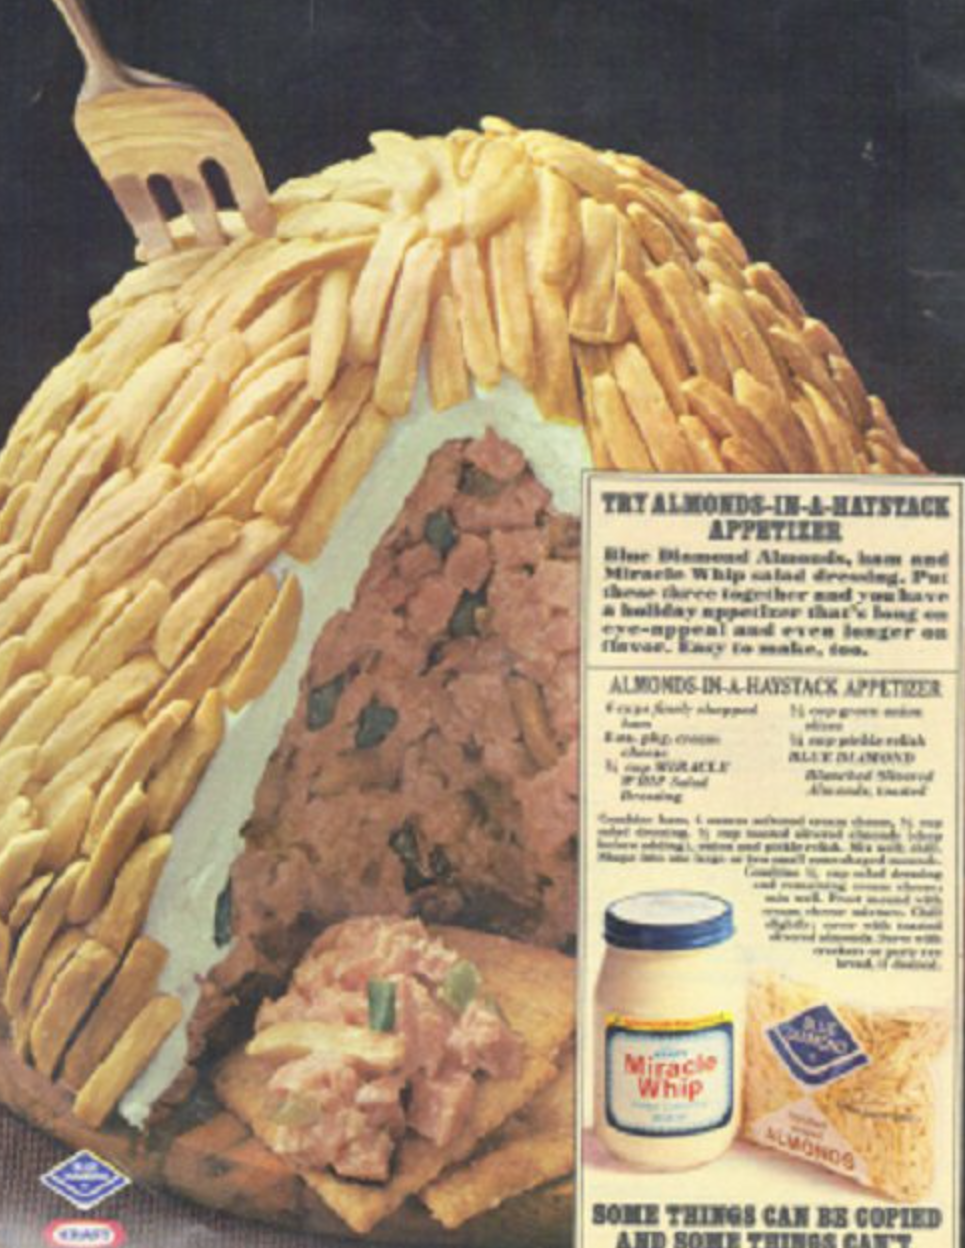 vintage 60s recipes - Try AlmondsInAHaystack Appetizer abullday appeter that's n eyeappeal and even lenger Almonds Inahaystack Appetizer Miracle Whip Some Things Can Be Copied And Some Things Can'T